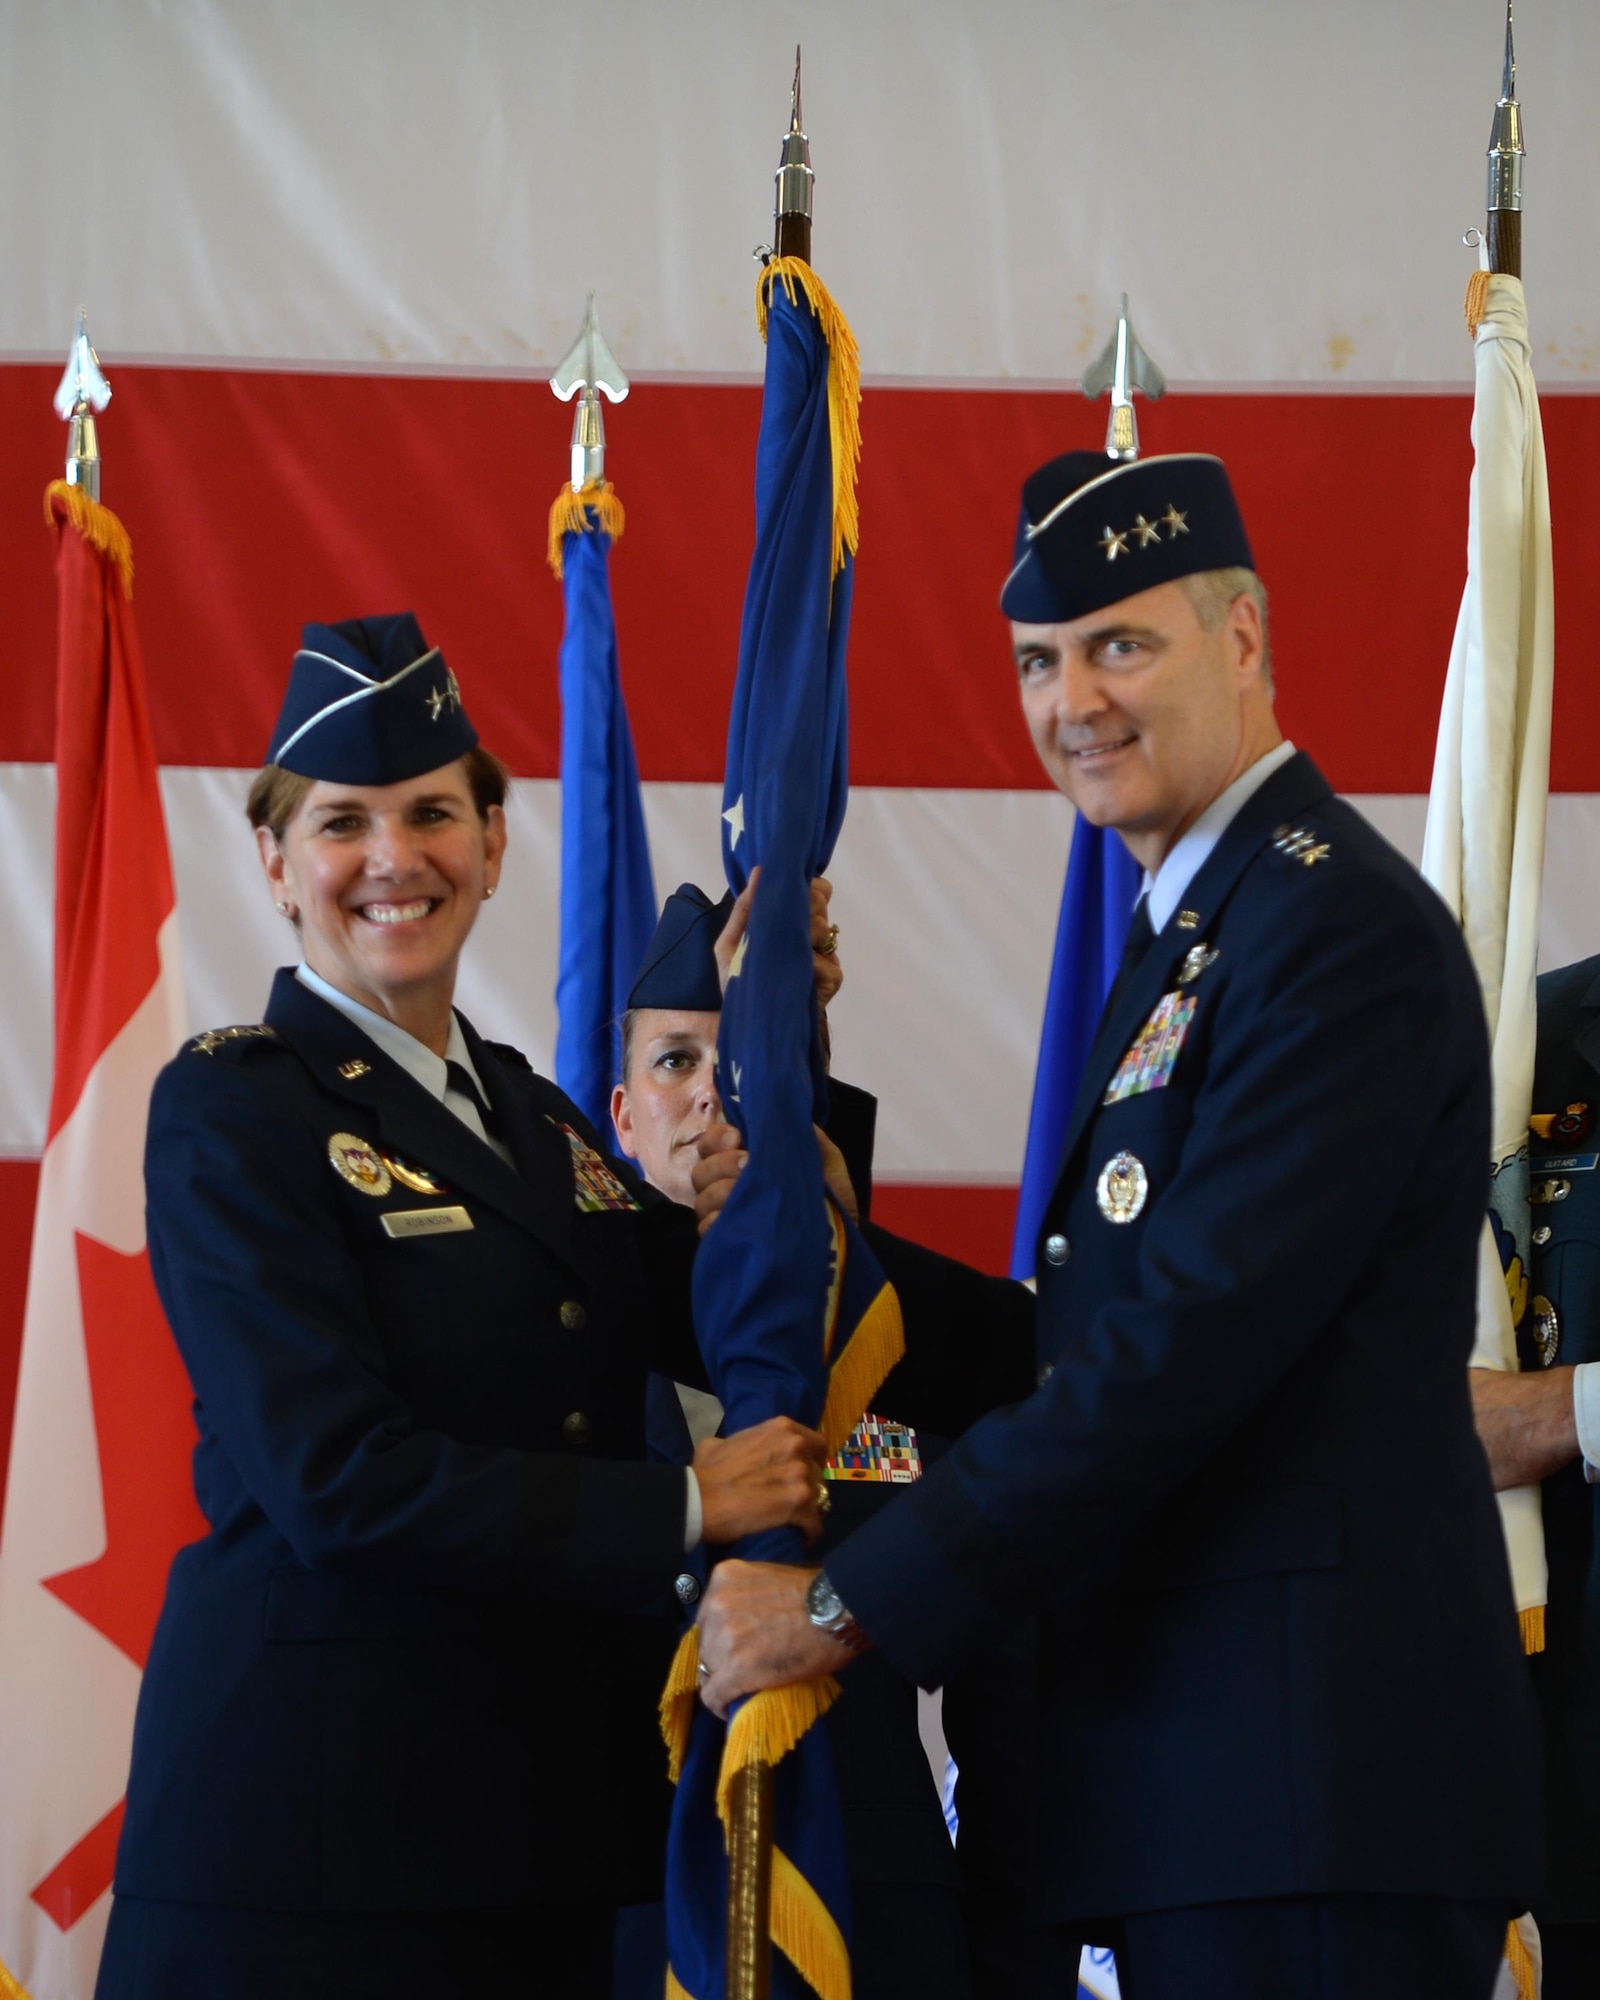 Gen. Lori Robinson, commander of North American Aerospace Defense Command and United States Northern Command, passes the guidon to Lt. Gen. Scott Williams, the incoming commander of Continental U.S. NORAD Region-1st Air Force (Air Forces Northern), at the CONR-1st AF change of command ceremony at Tyndall AFB, Fla., July 6, 2016. First Air Force has the responsibility of ensuring the air sovereignty and air defense of the continental United States. (U.S. Air Force photo by Airman 1st Class Cody R. Miller/Released)